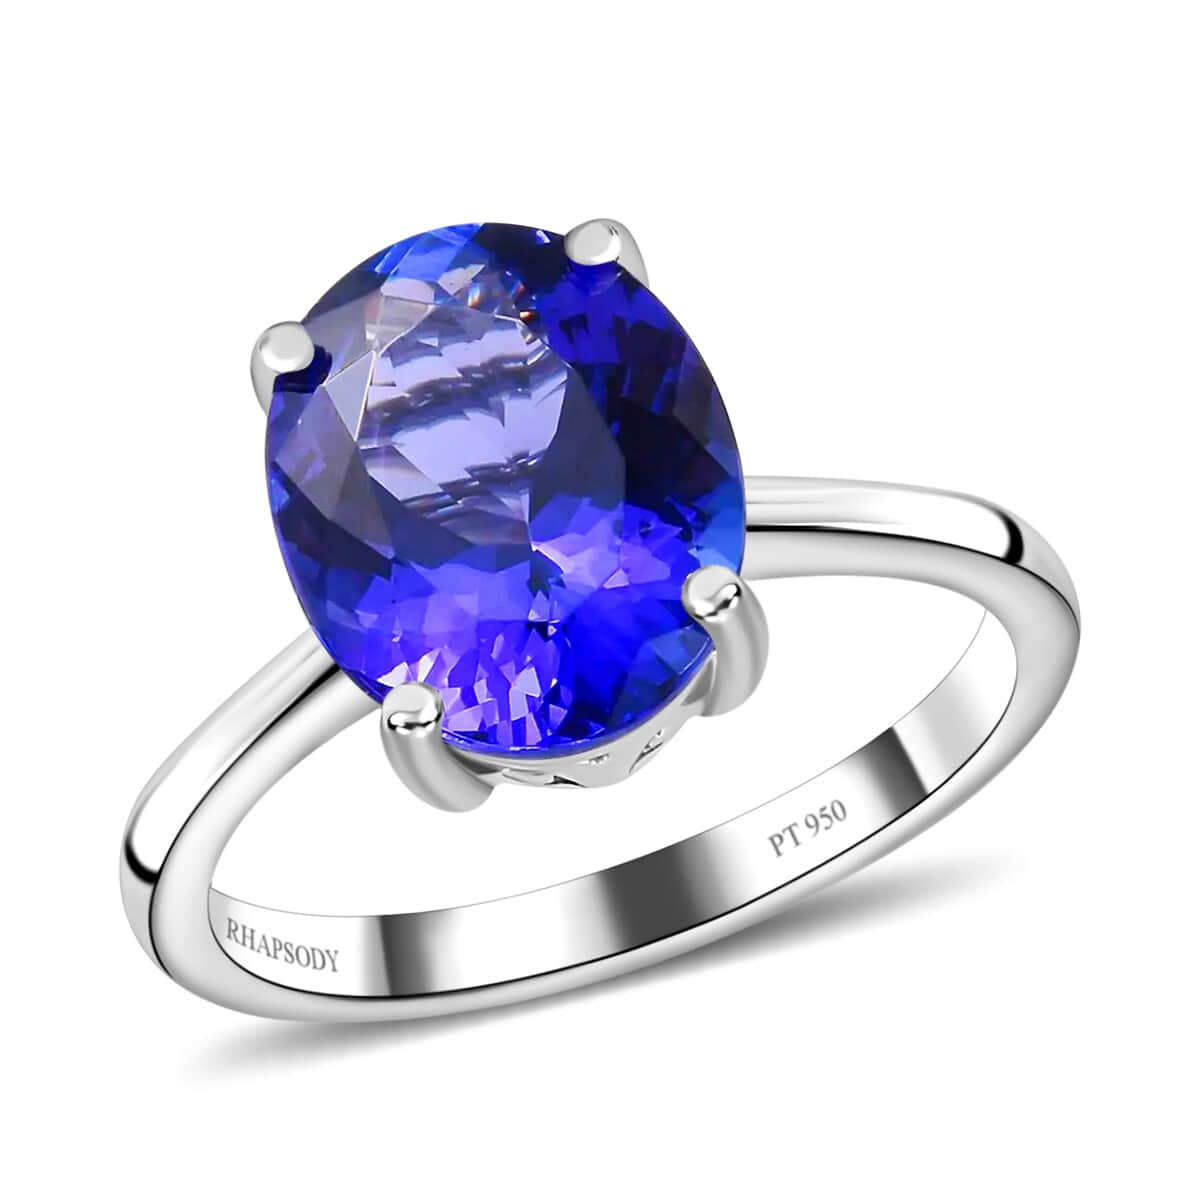 Rhapsody 950 Platinum AAAA Tanzanite Solitaire Ring with Appraised Certificate (Size 8.0) 6.45 Grams 4.90 ctw image number 0